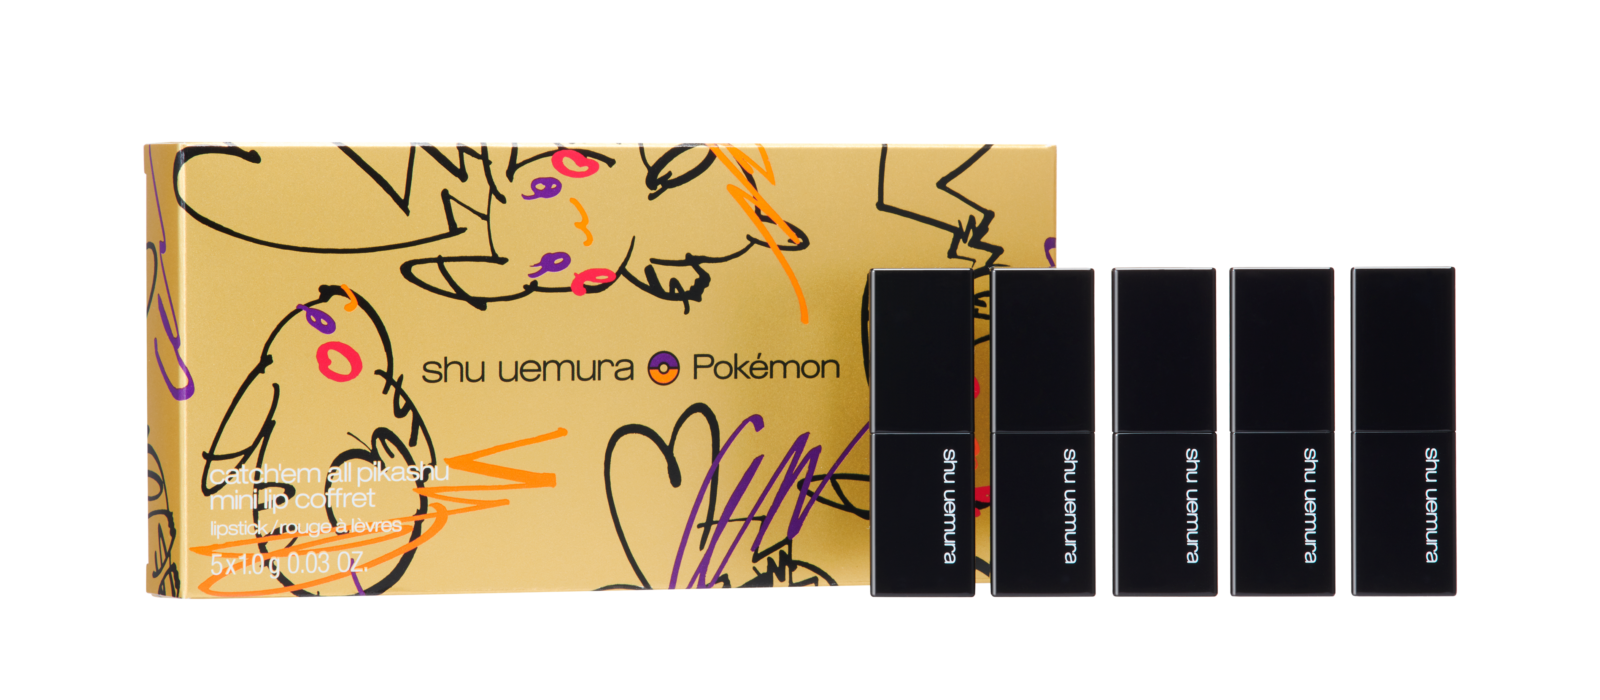 Ready Your Wallets, Shu Uemura Will Be Launching A New Collection That Features Pikachu! - WORLD OF BUZZ 2